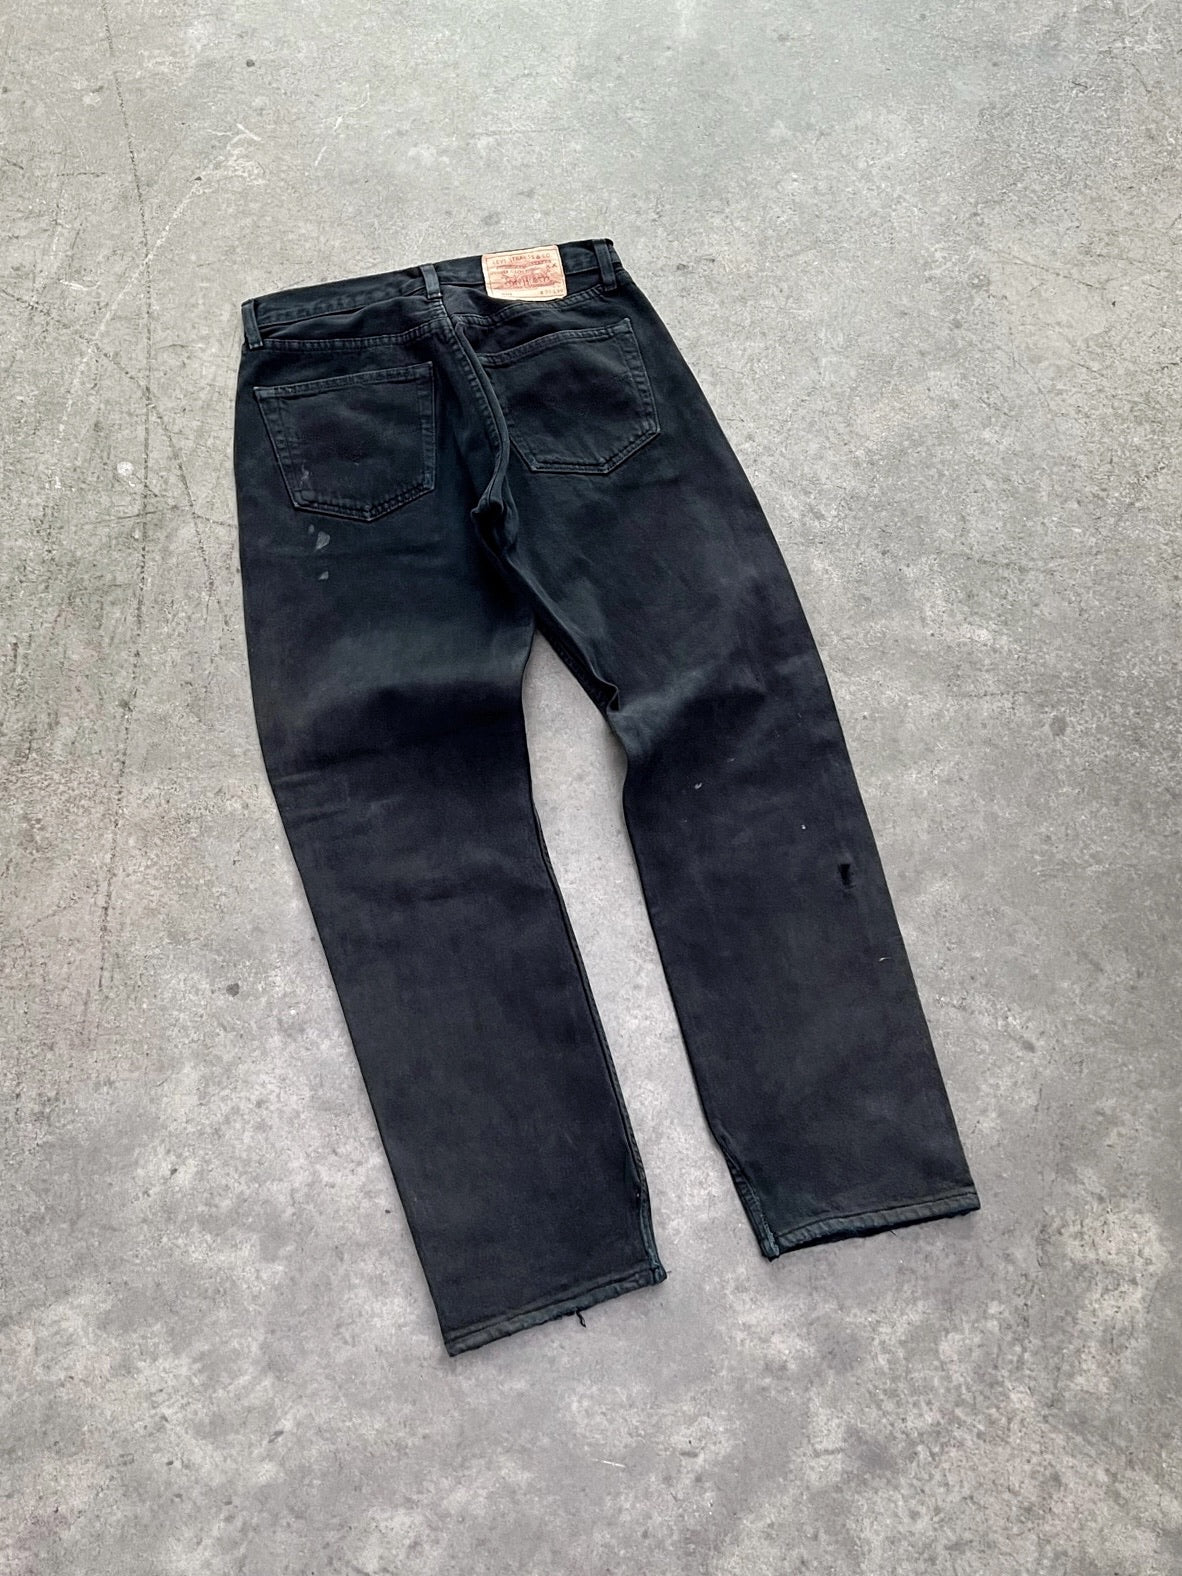 LEVI’S 501 FADED BLACK REPAIRED JEANS - 1990S